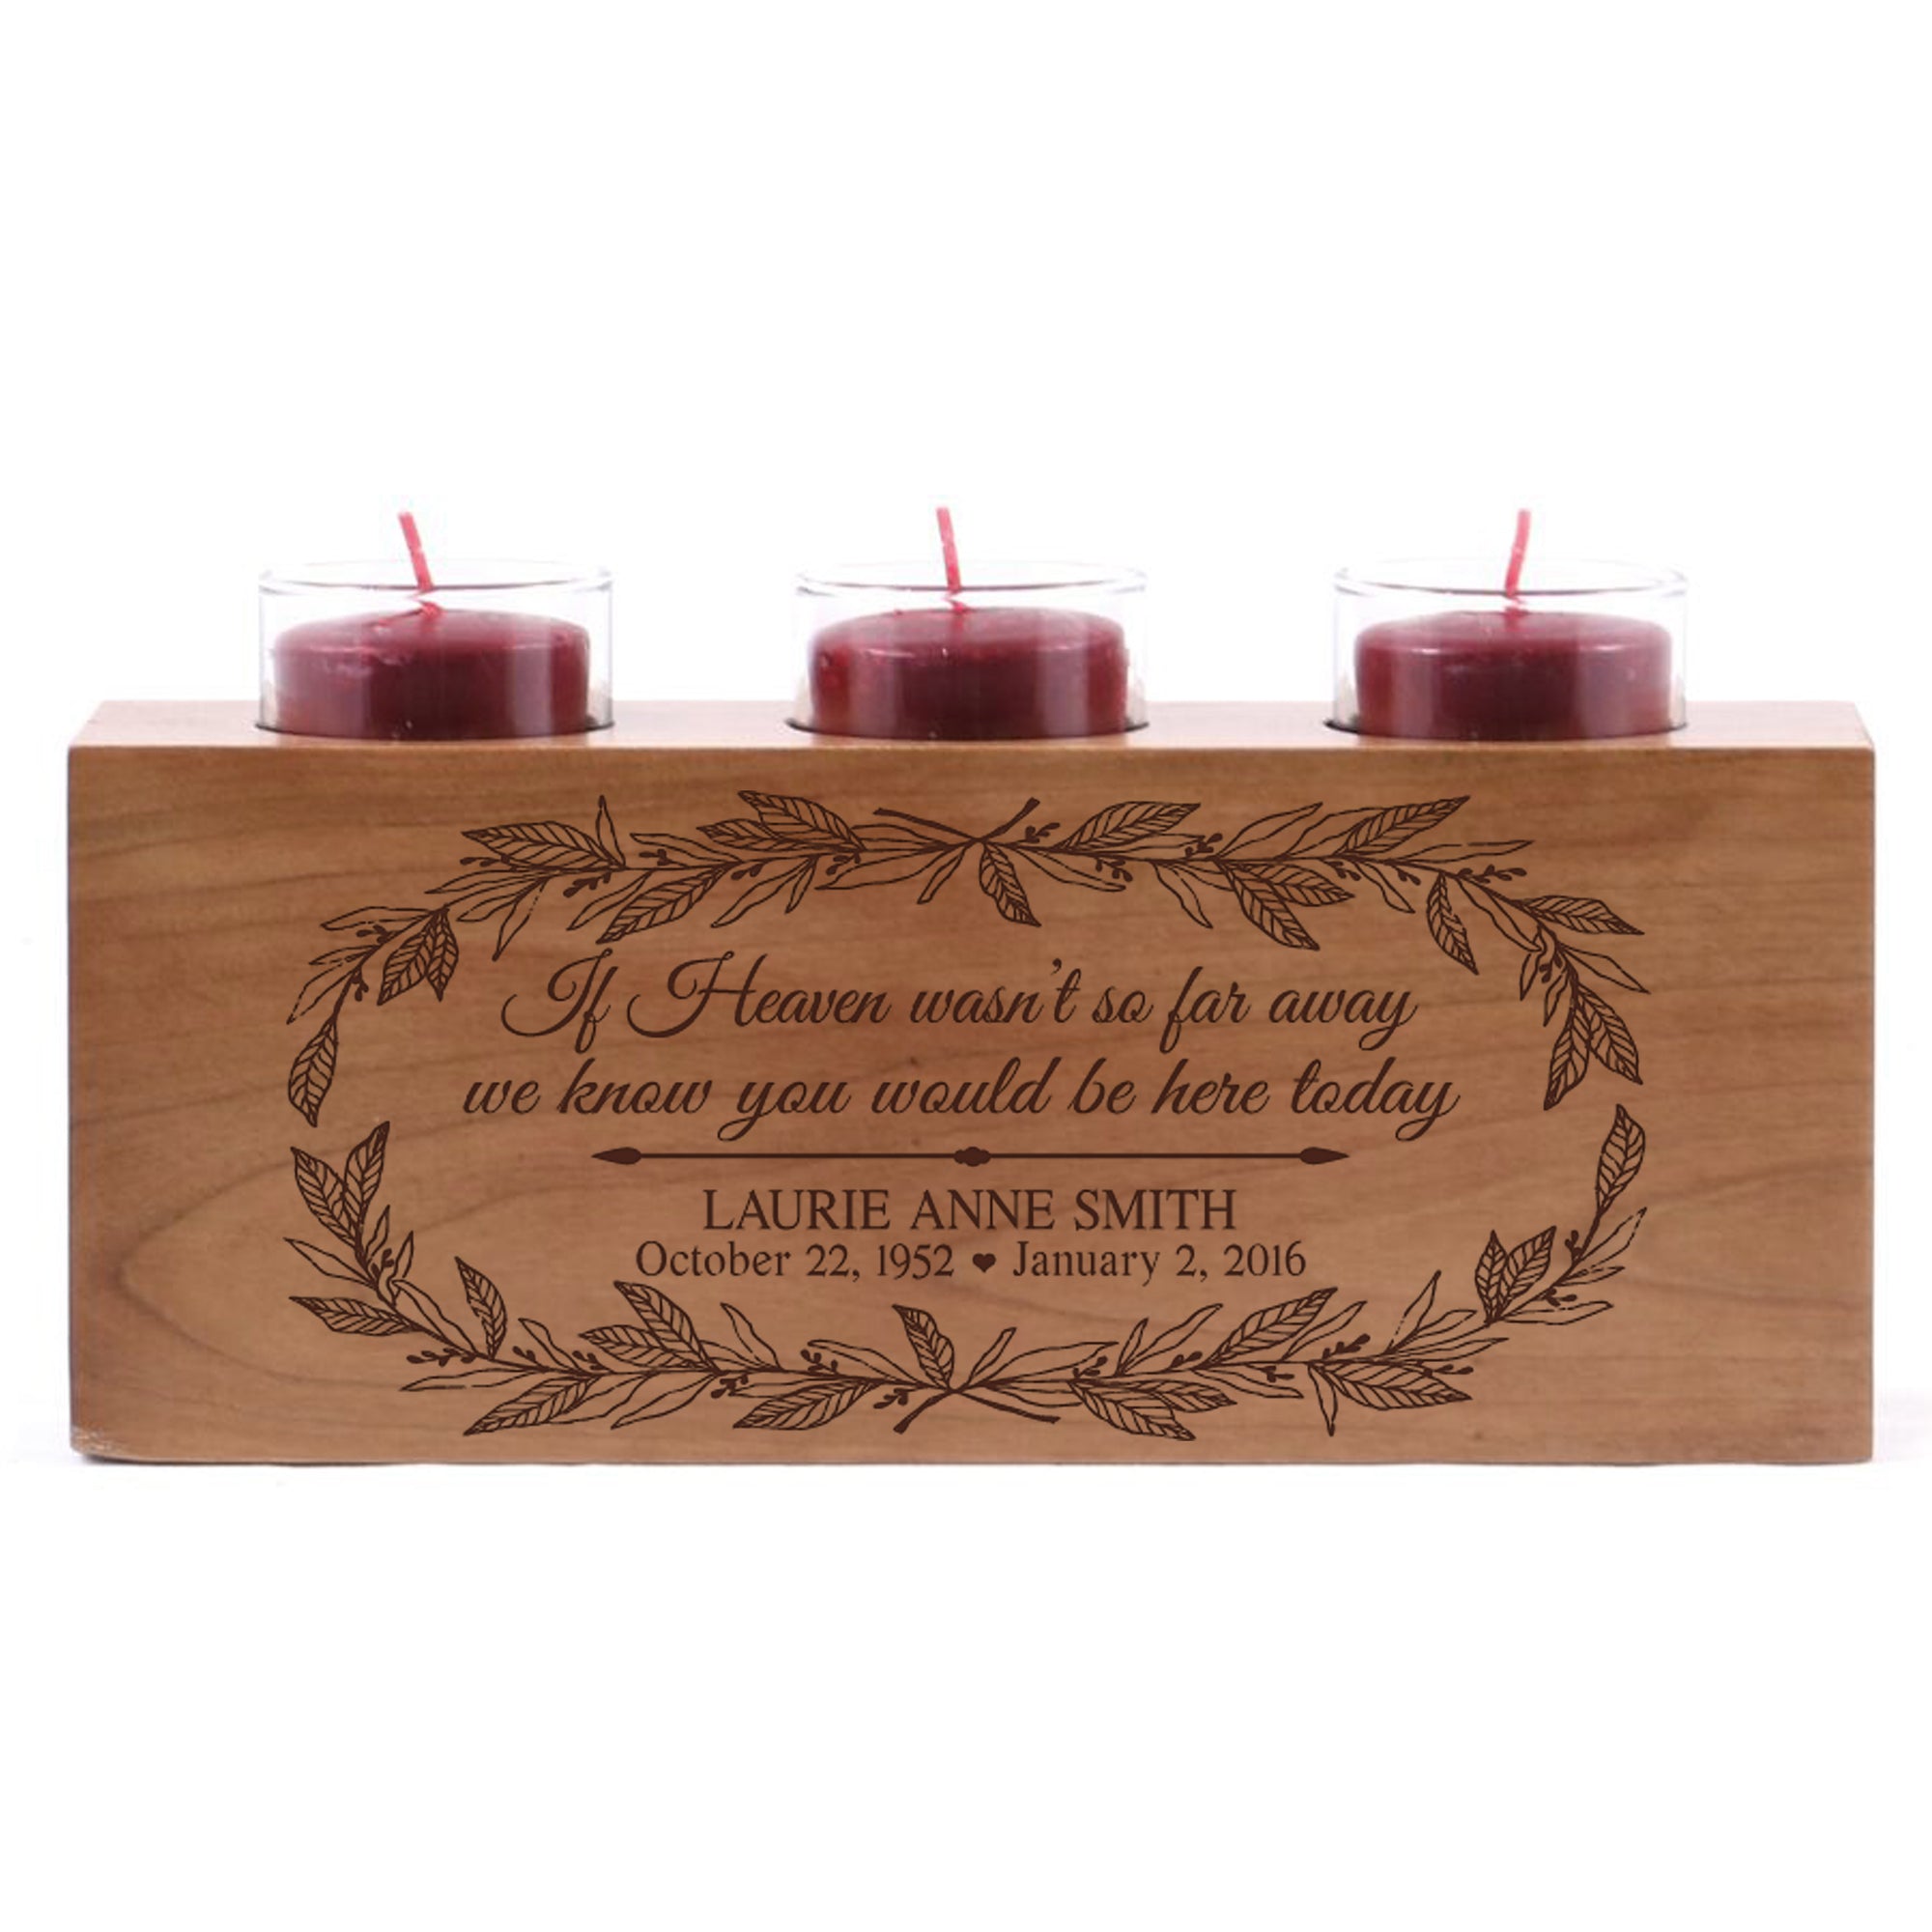 Personalized Memorial sympathy candle holder custom engraved cherry wood keepsake ideas for Loved One 10" L x 4" H by LifeSong Milestones